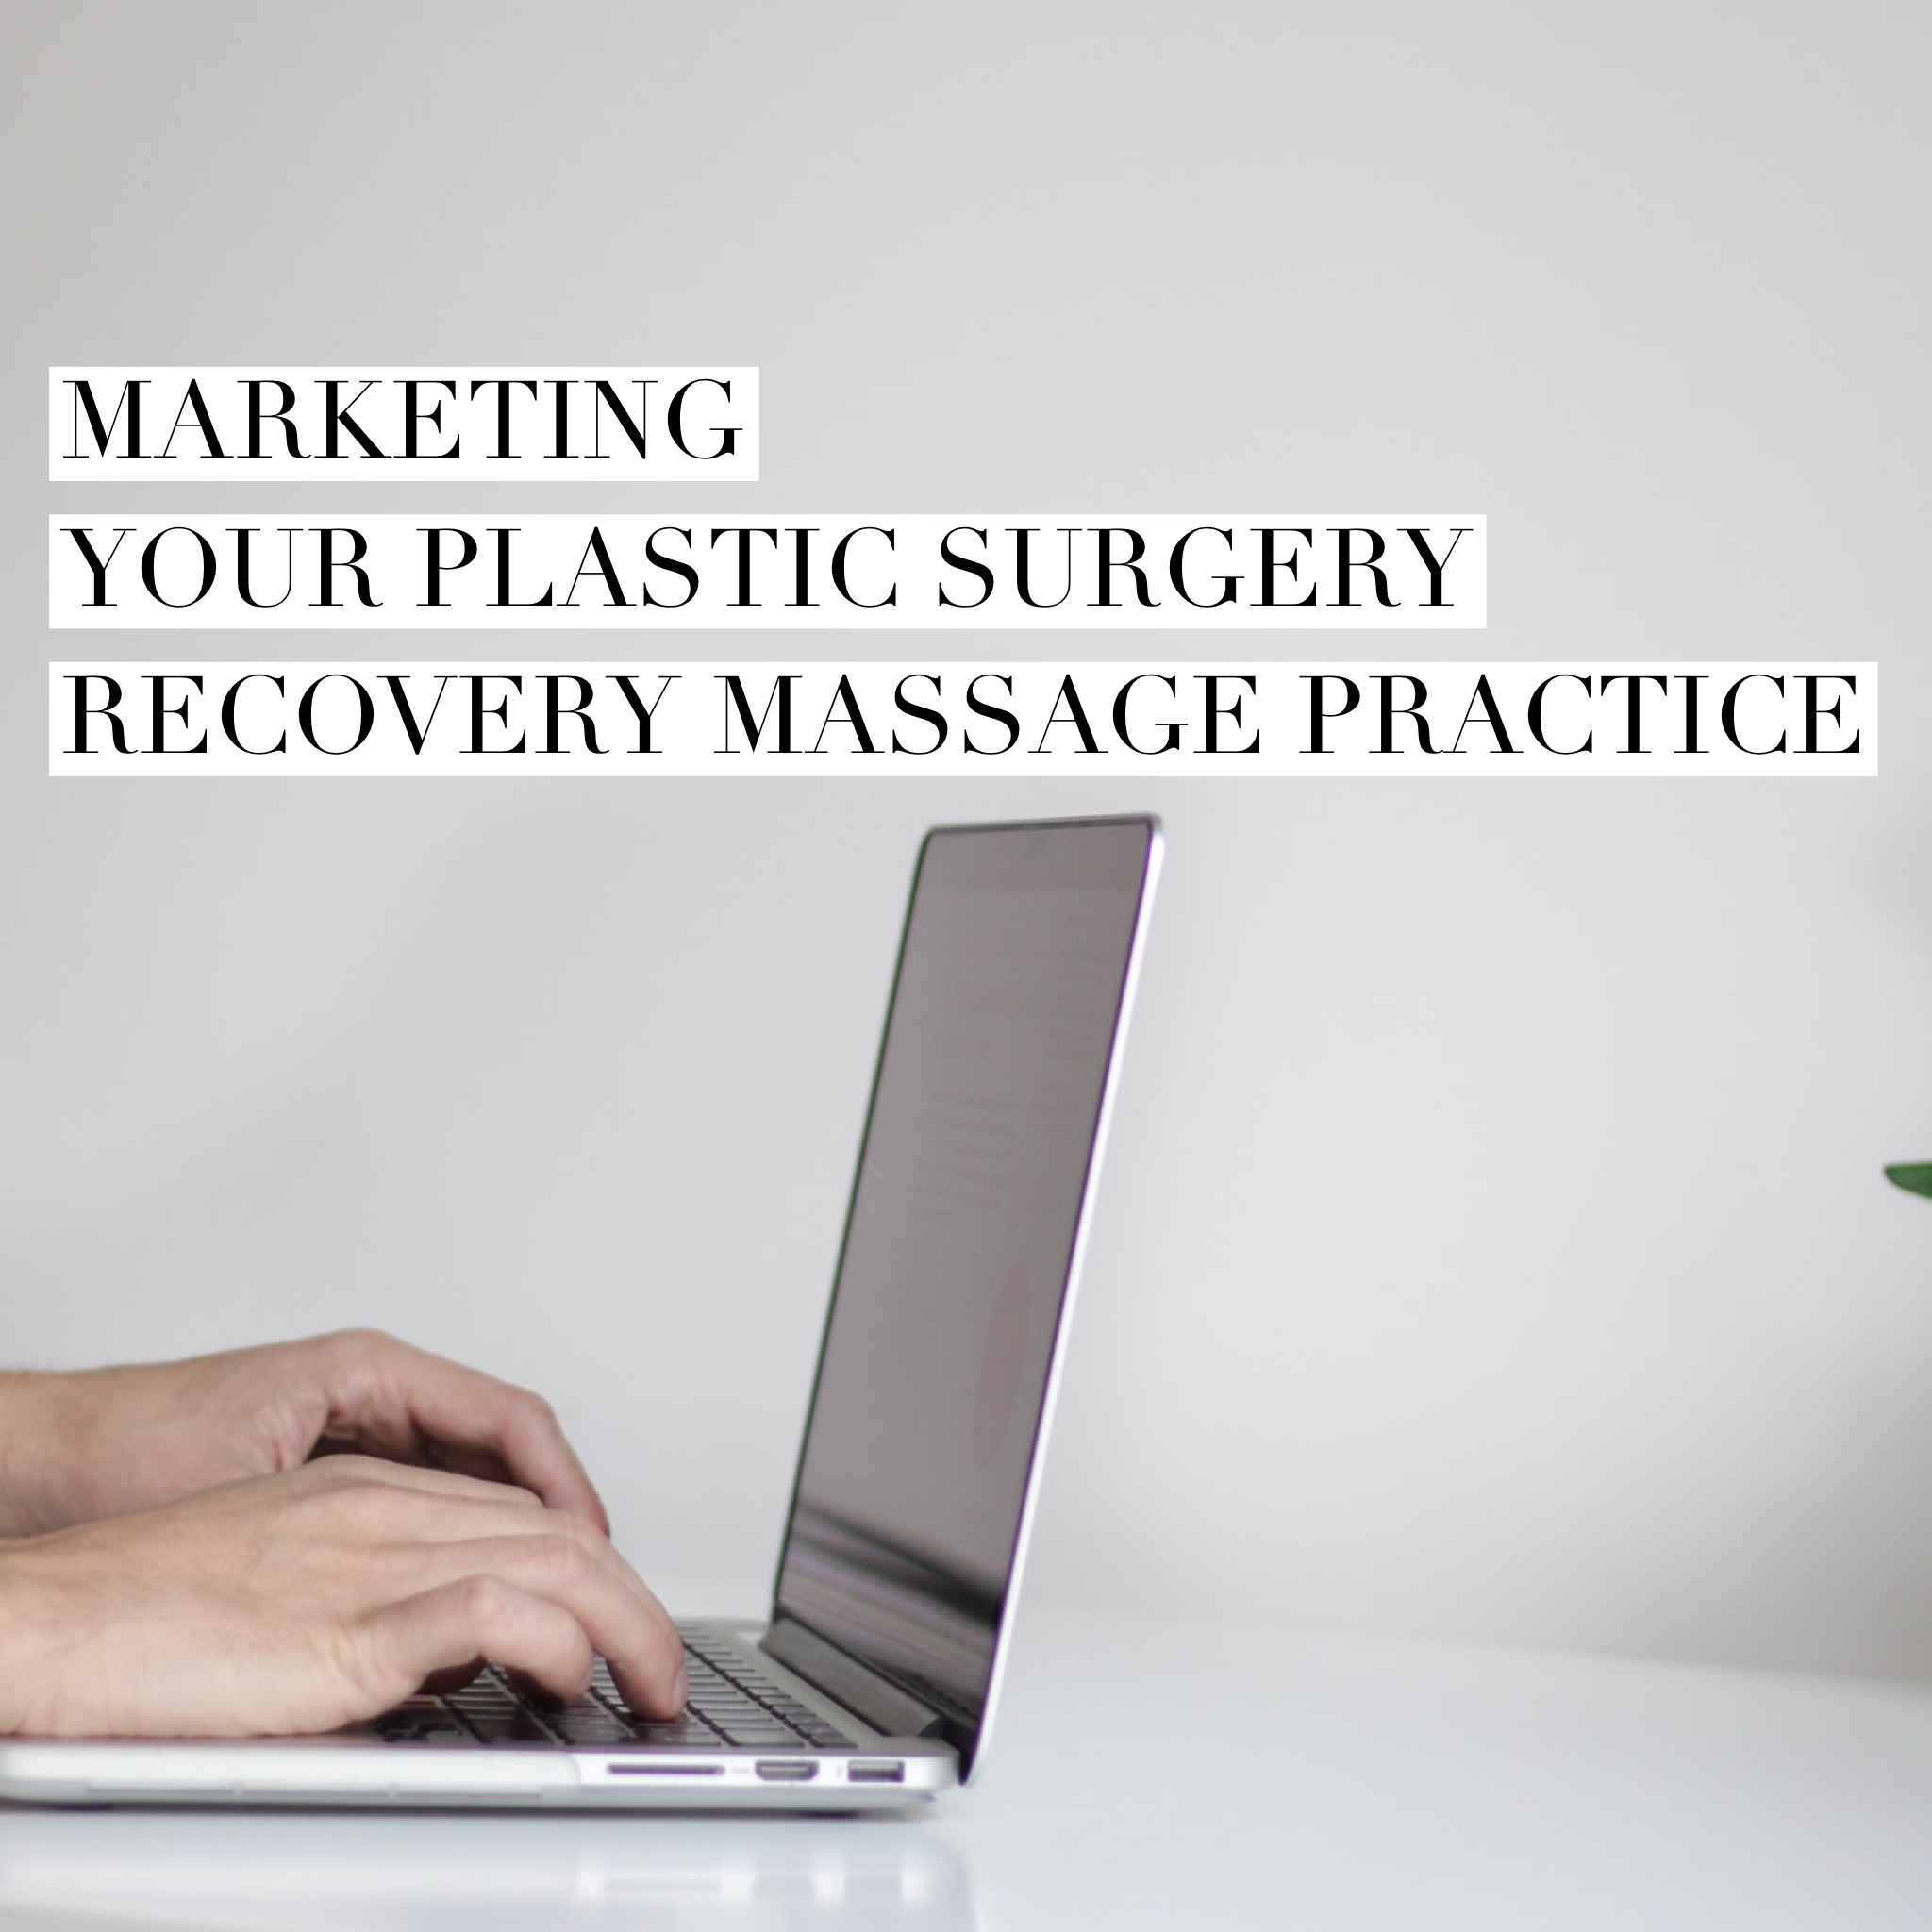 Marketing for lymphatic massage therapists